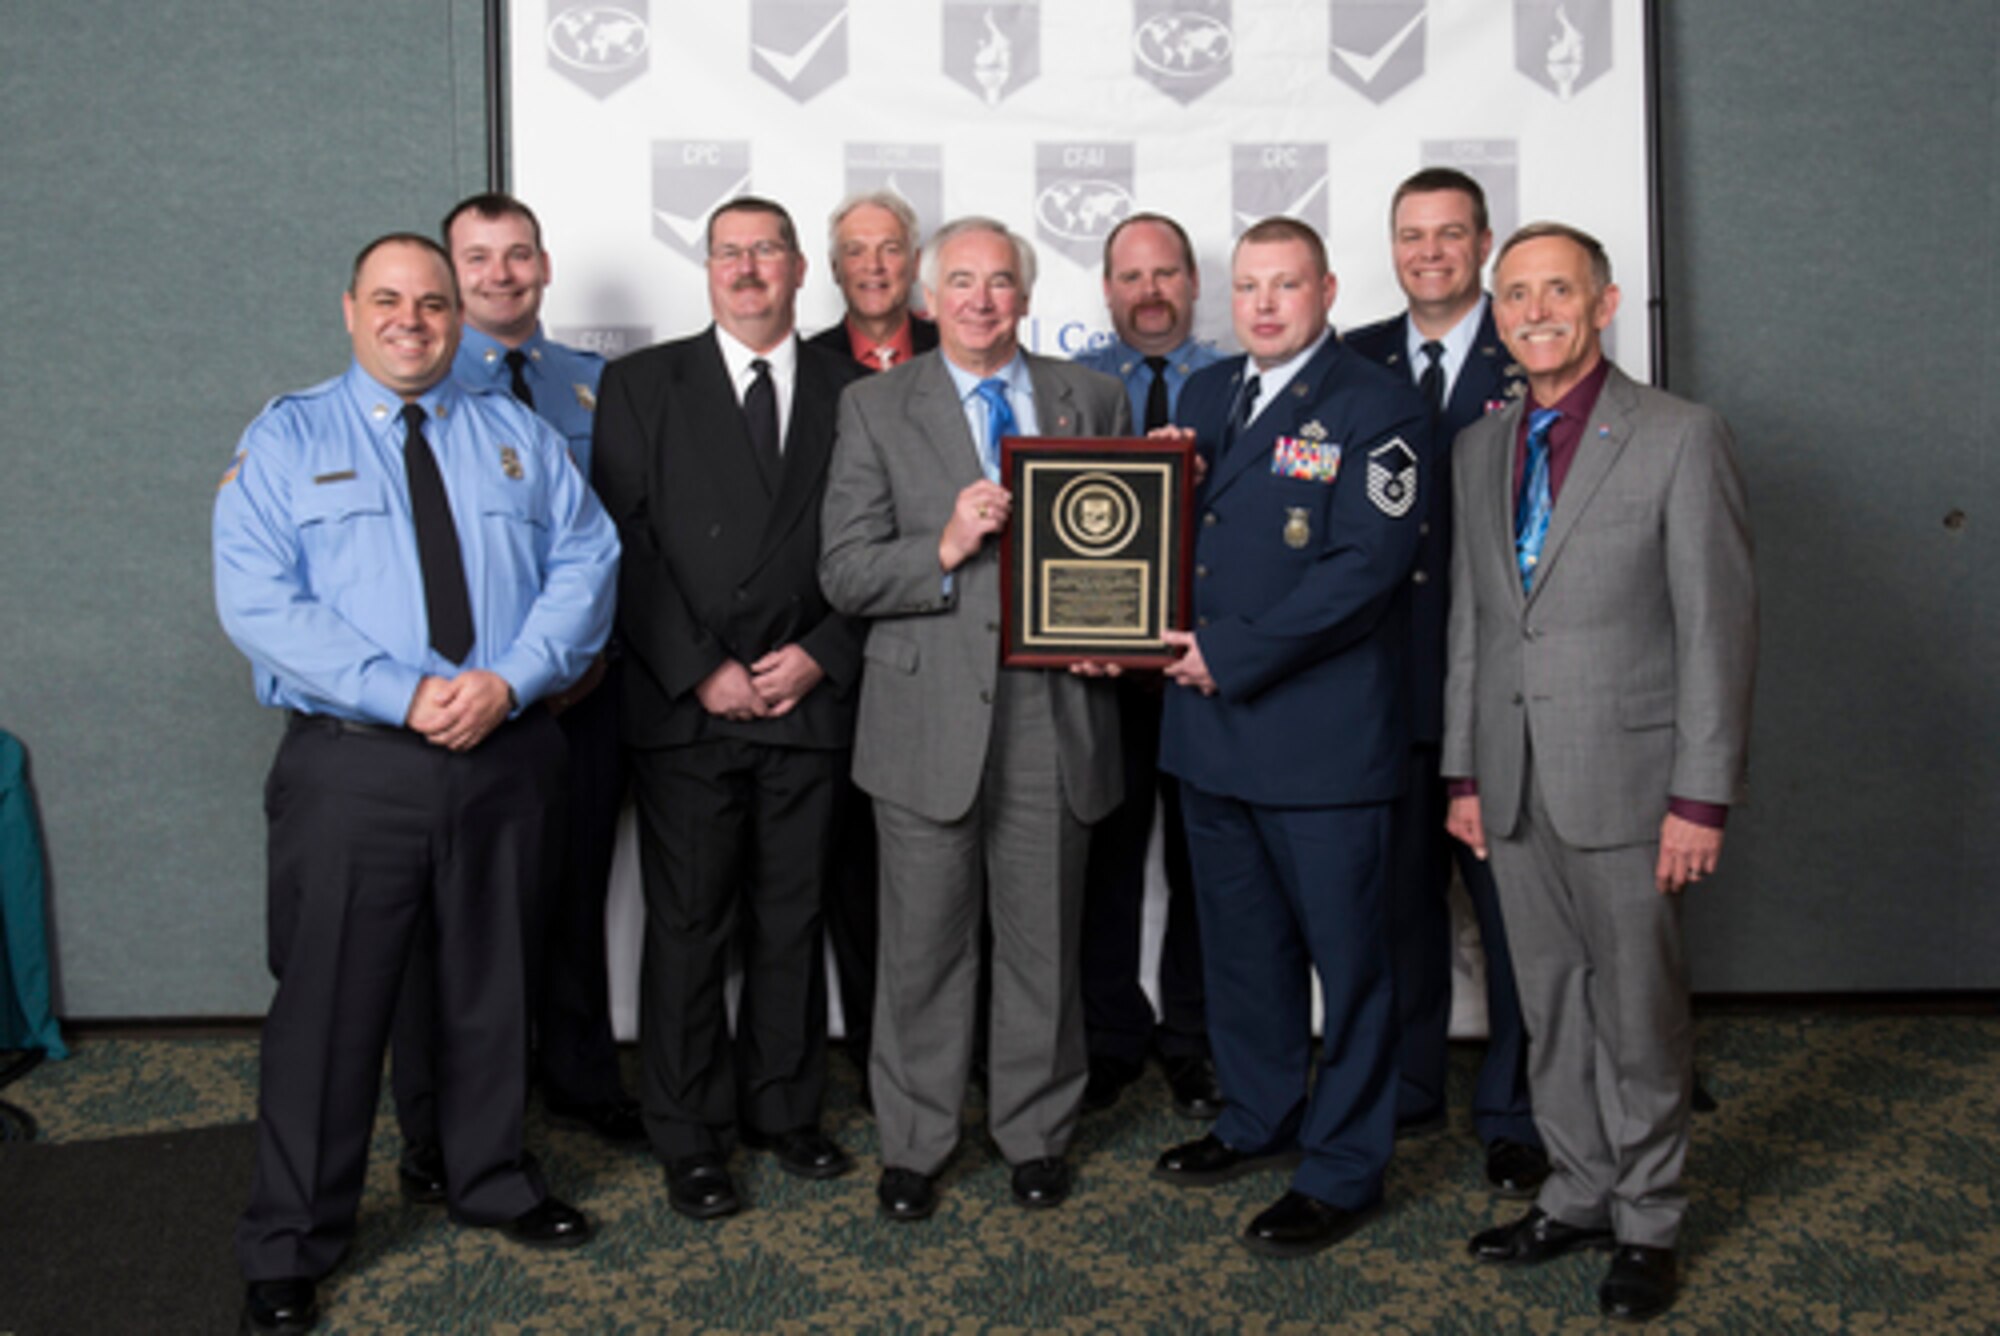 The 115th Fighter Wing Truax Fire and Emergency Services fire department from Madison, Wis., poses with an accreditation plaque in Orlando, Flo., March 16, 2016. The 115 FW Truax Fire and Emergency Services fire department became the first in Dane County and the ninth in the state to be accredited. (Photo courtesy of Master Sgt. Gary Peck)